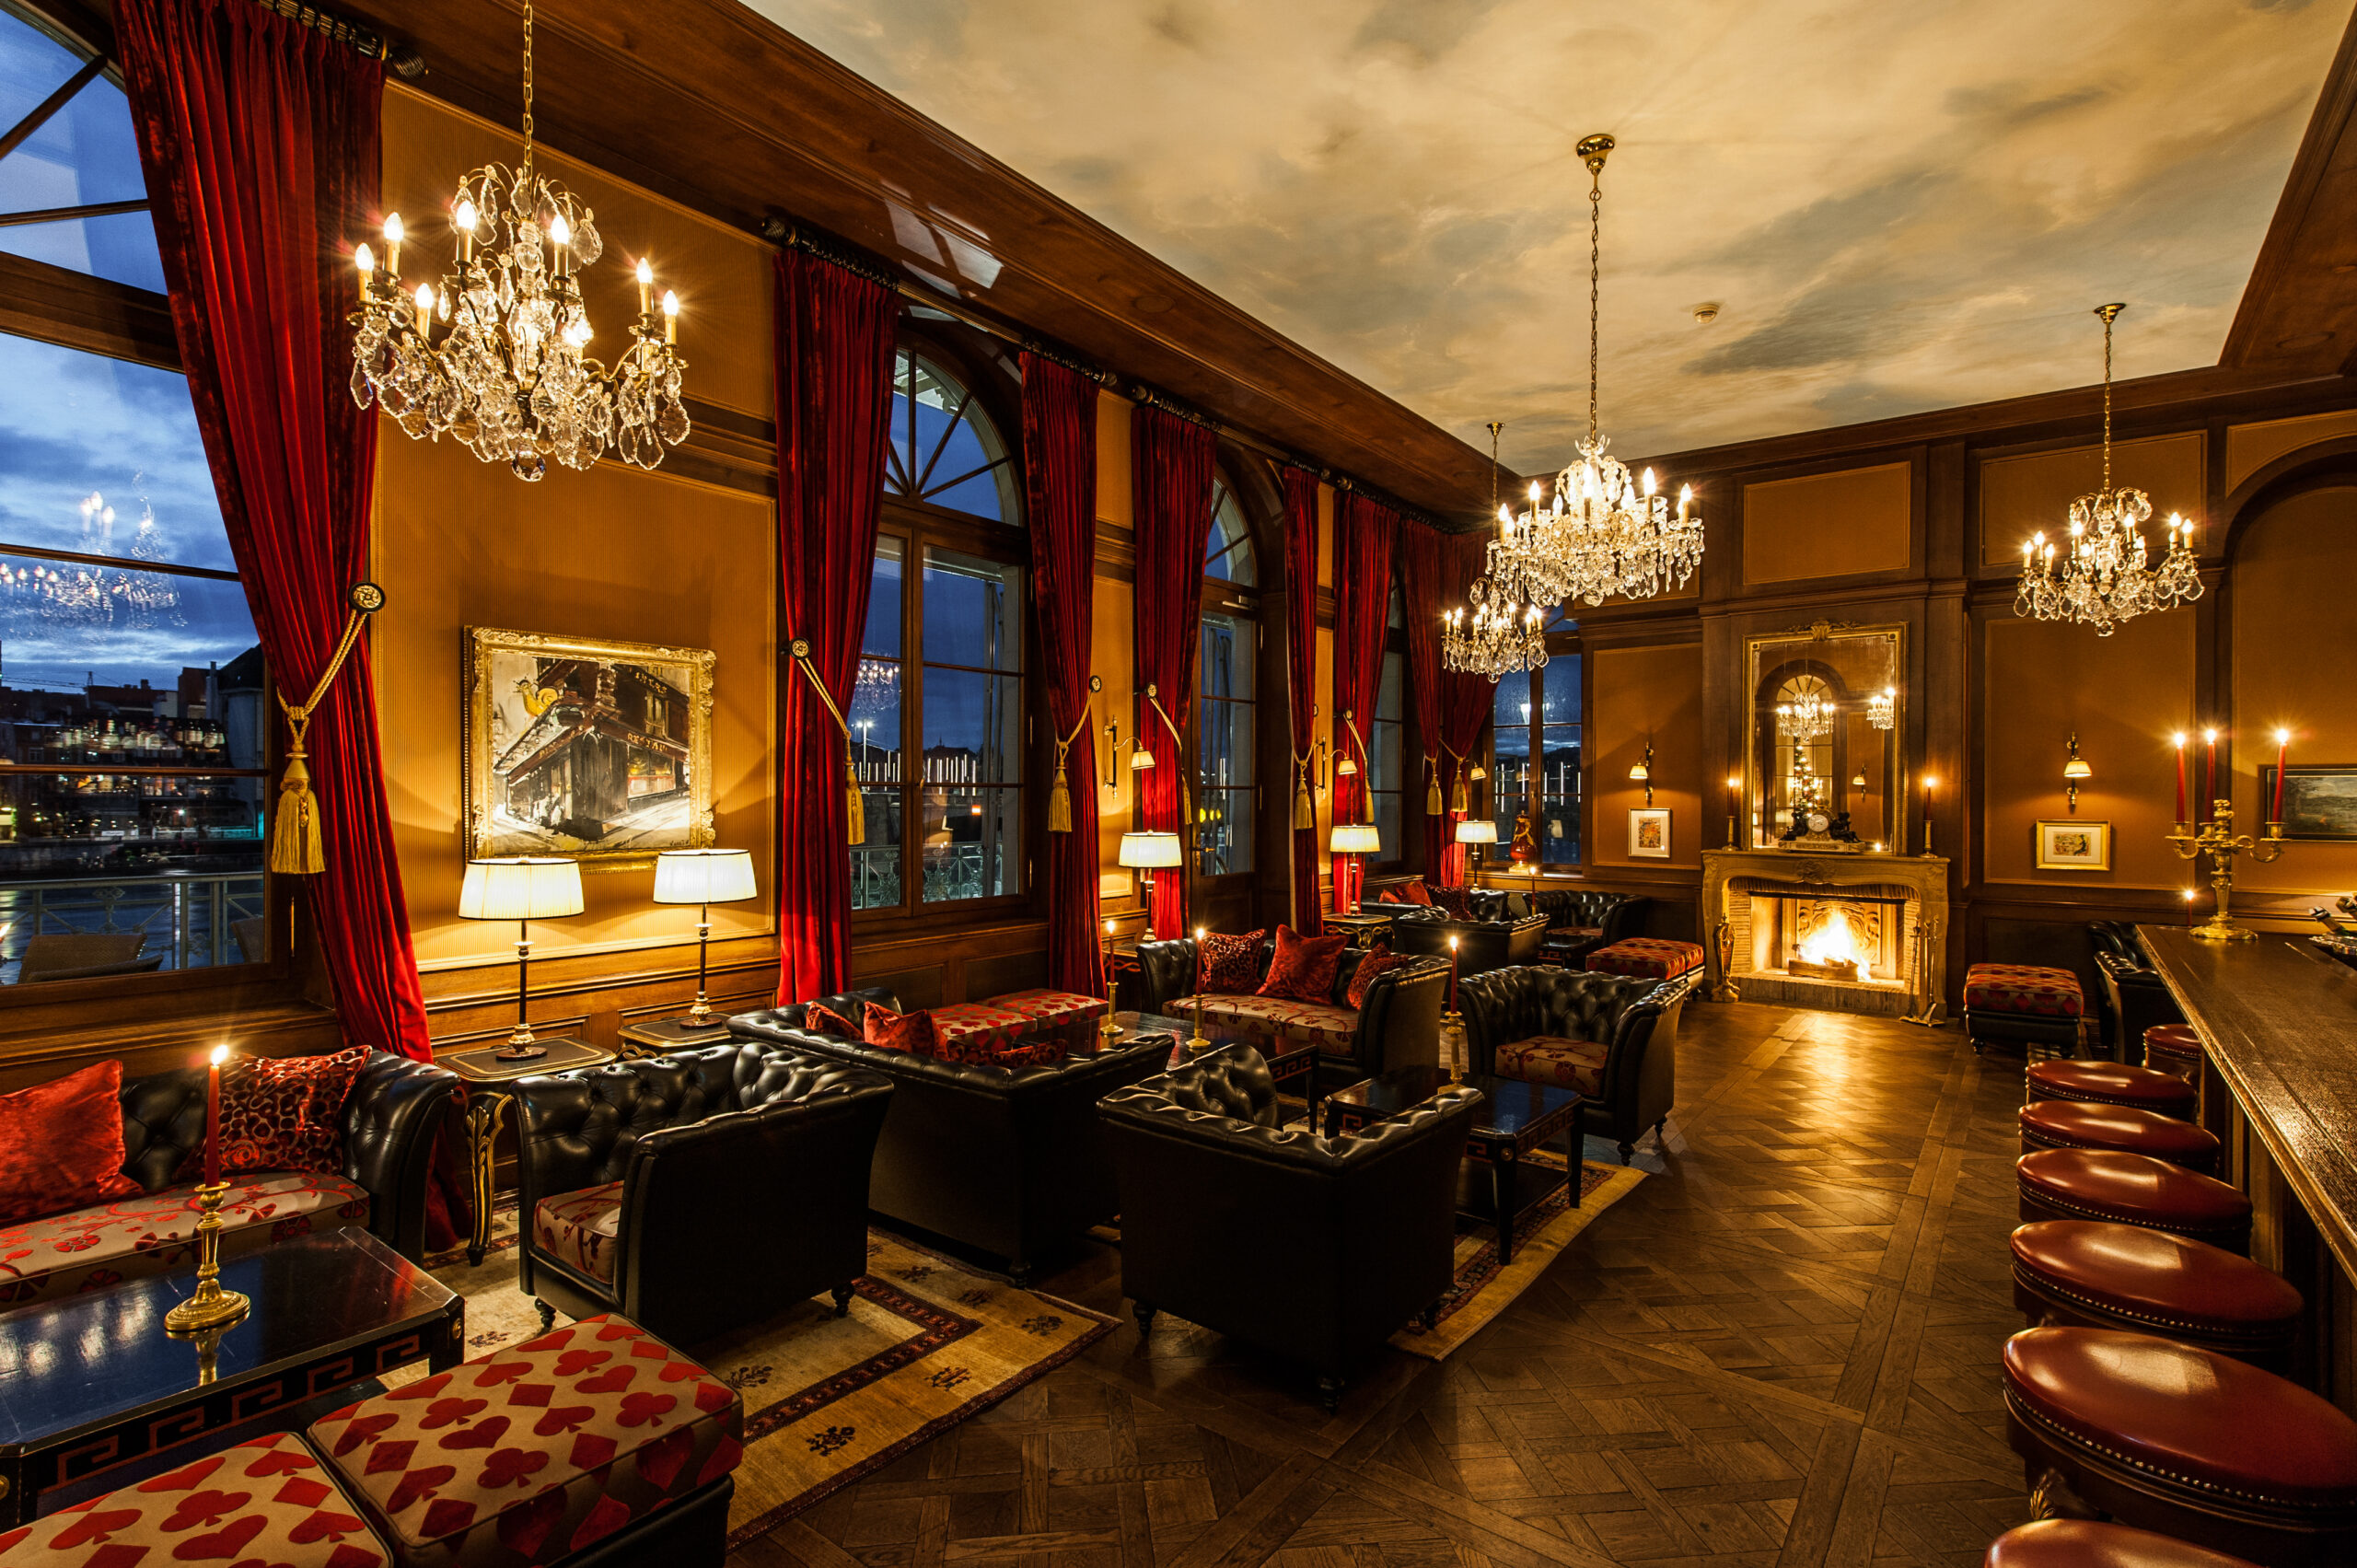 Luxury interior design at its finest at hotel Les Trois Rois Basel